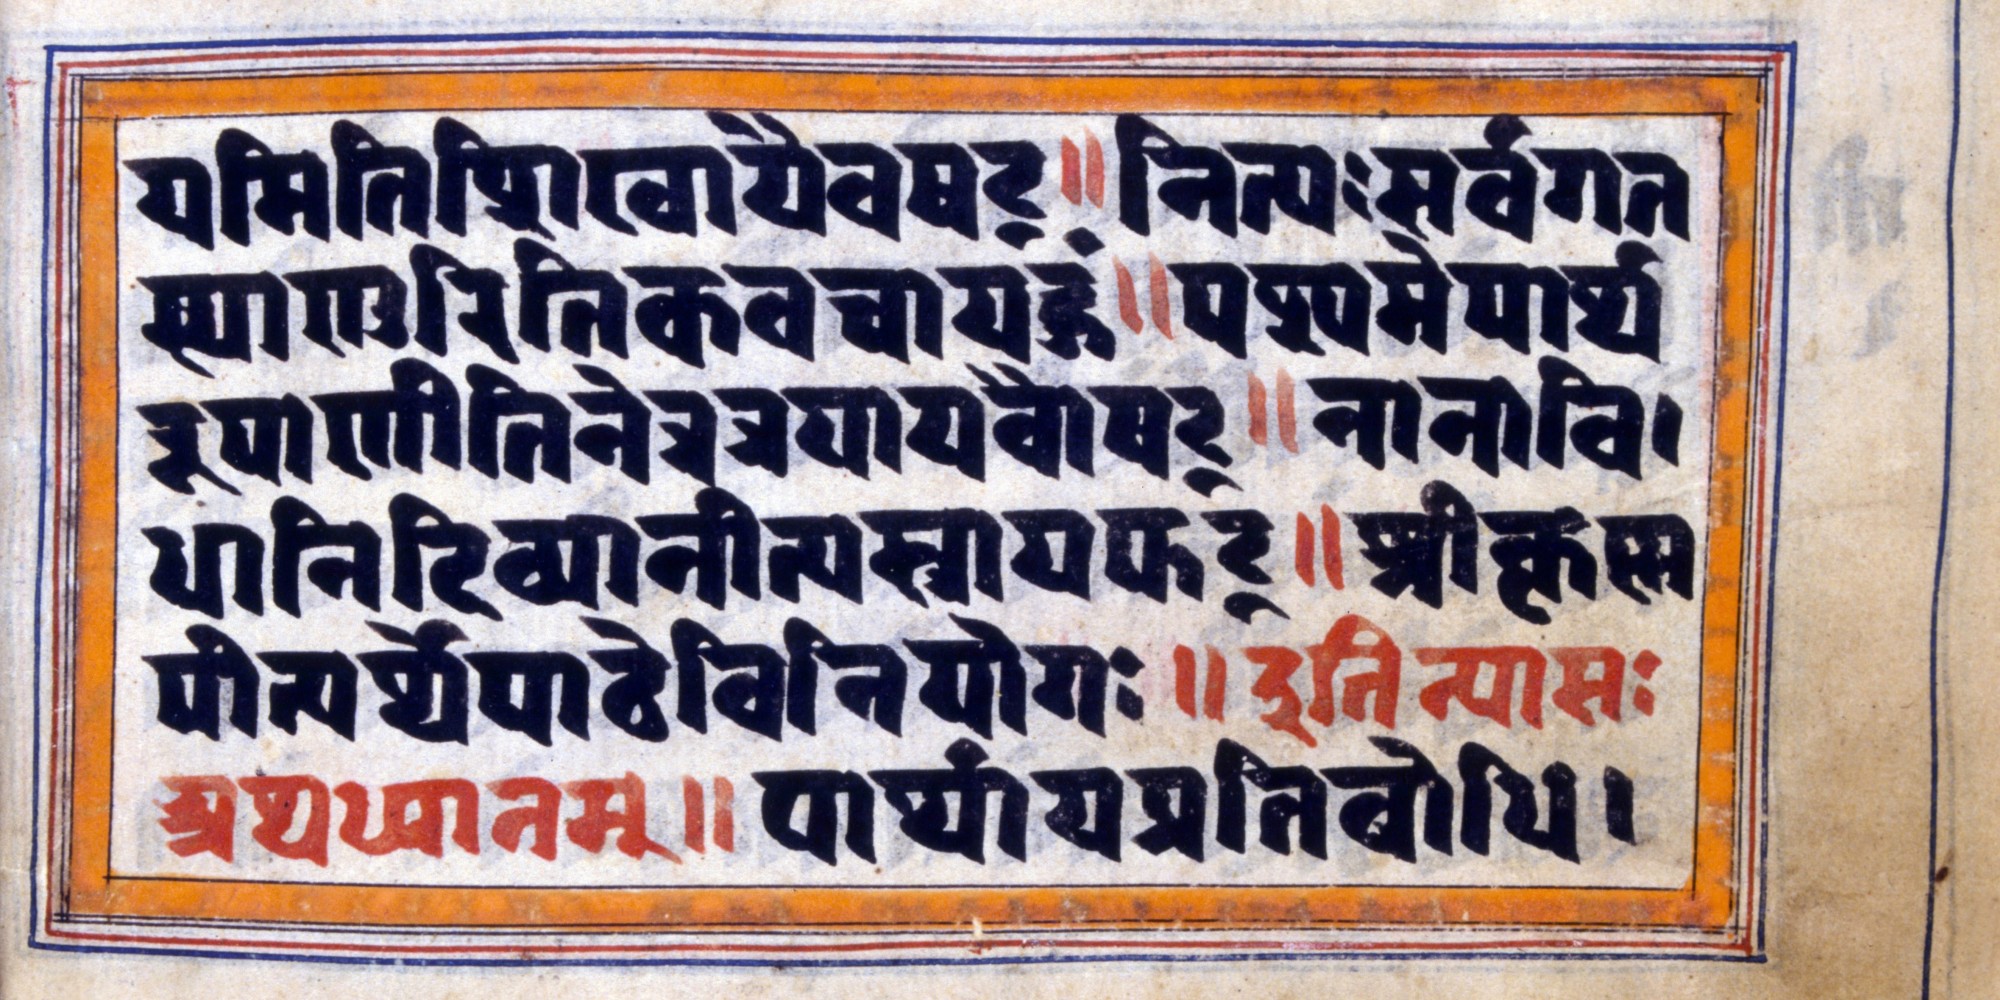 This Ancient Hindu Text May Hold The Key To Living A Life Of Purpose